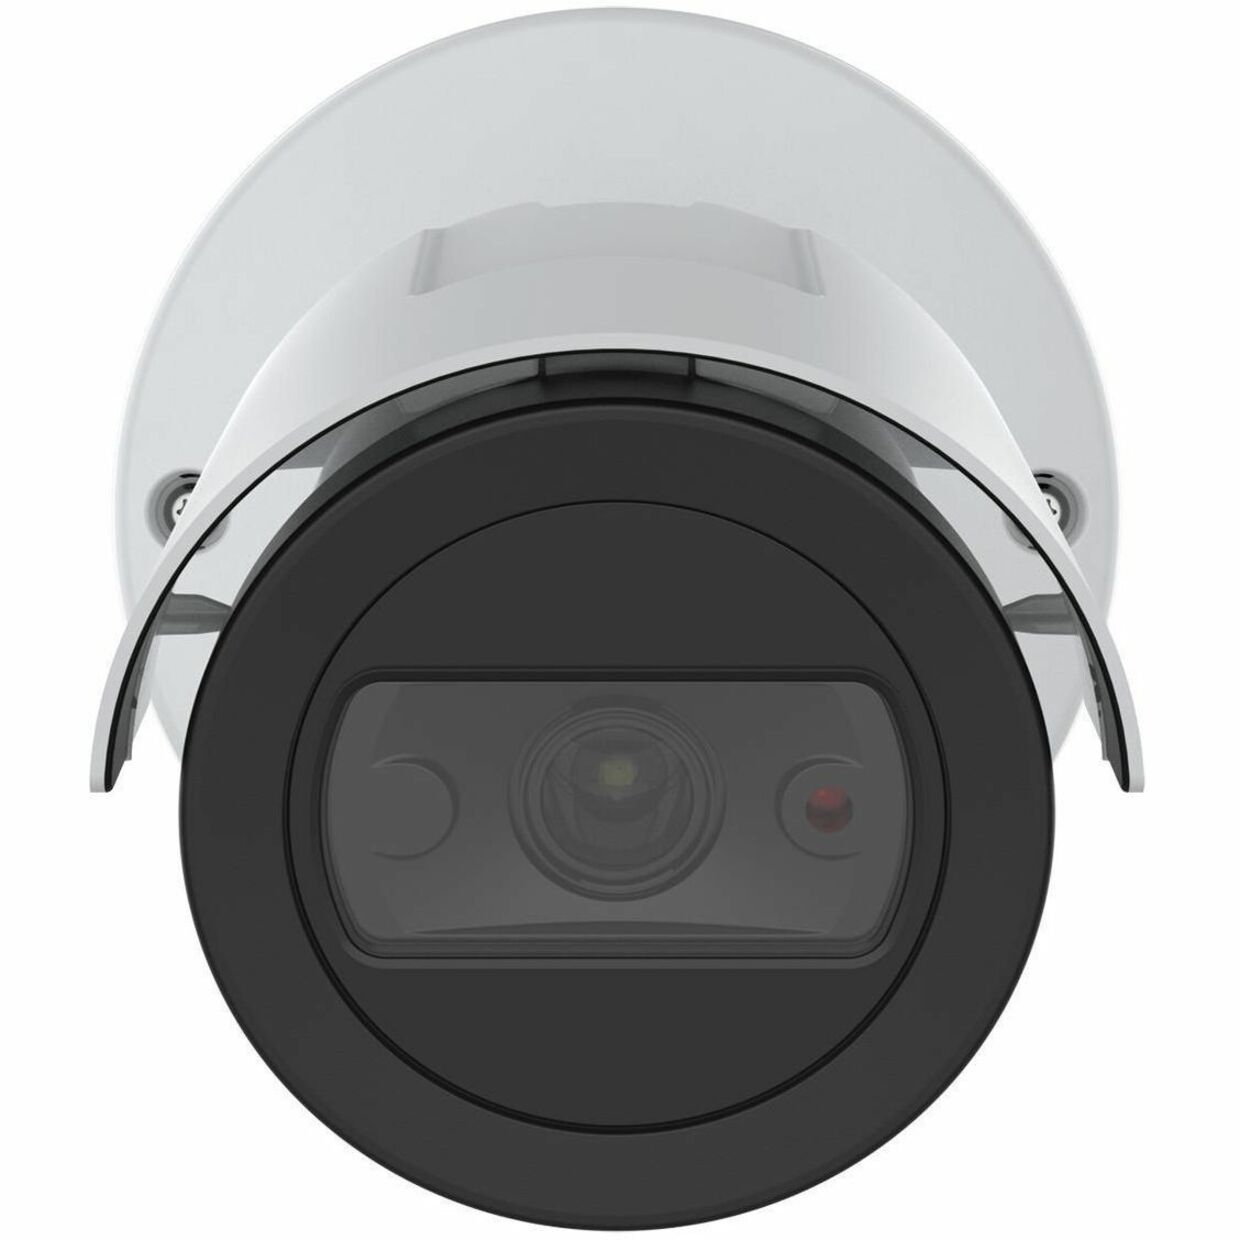 AXIS 02124-001 M2035-LE Network Camera, Outdoor Full HD Color, Remote Management